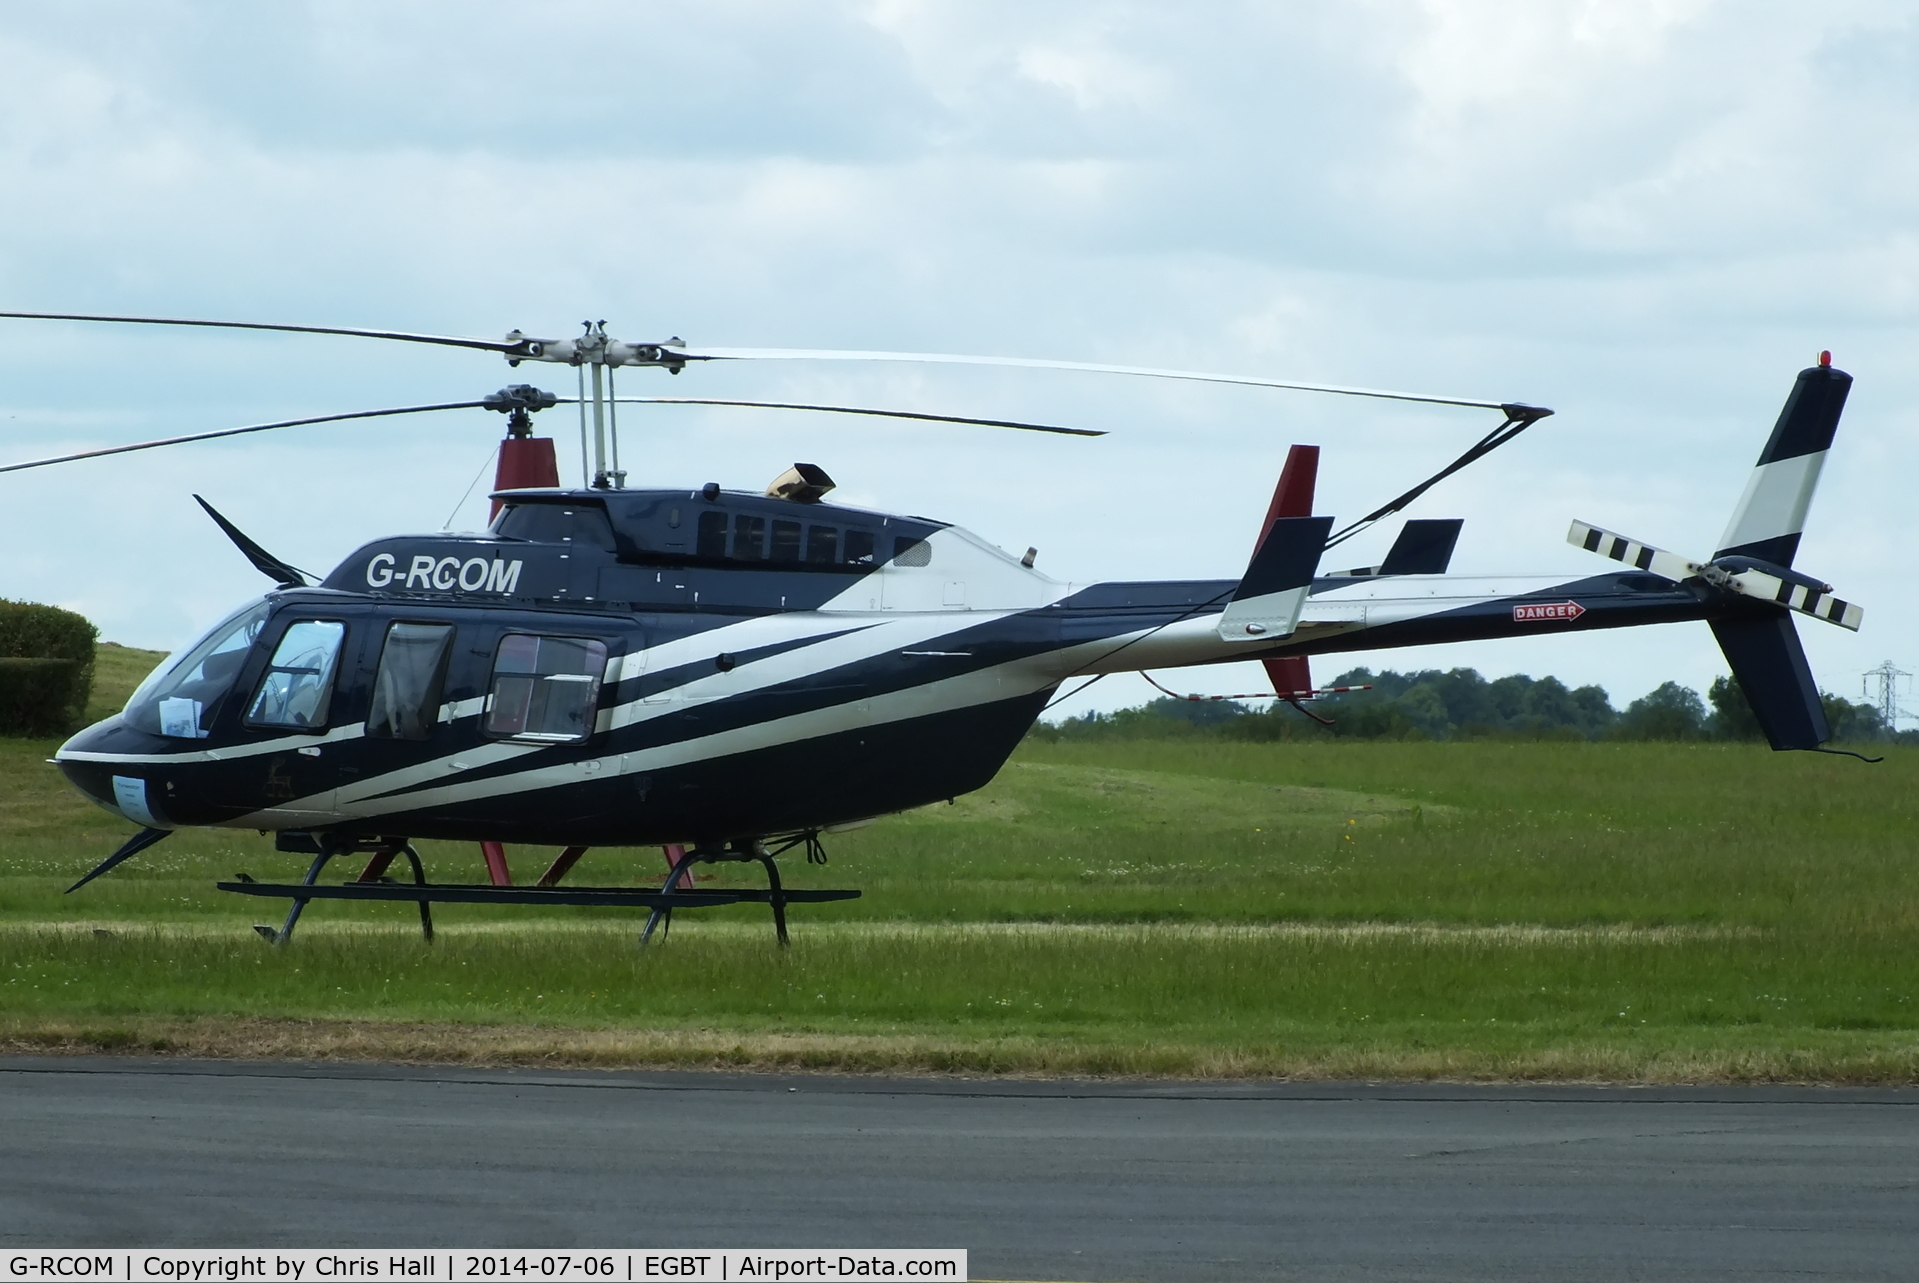 G-RCOM, 1992 Bell 206L-3 LongRanger III C/N 51599, ferrying race fans to the British F1 Grand Prix at Silverstone